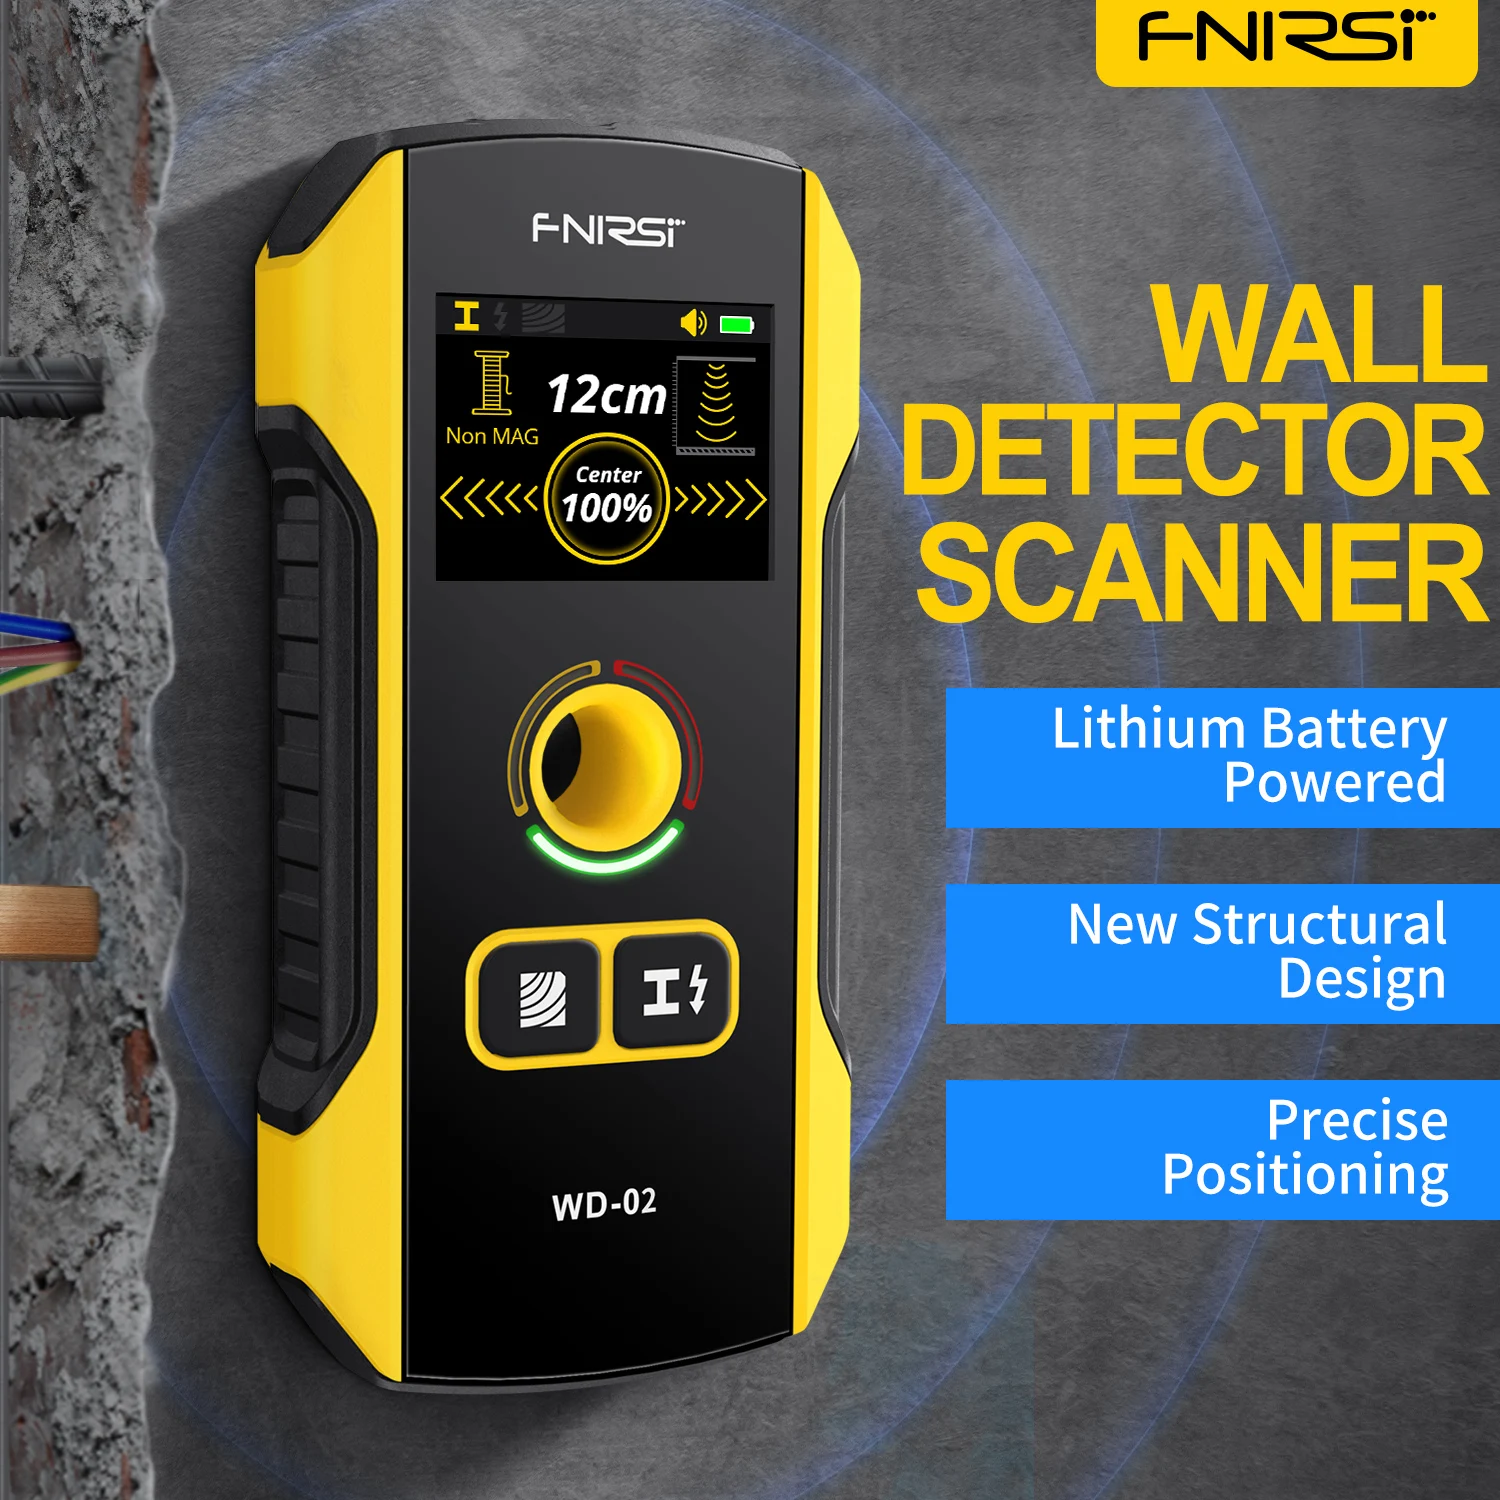 FNIRSI WD-01/WD-02 Metal Detector Wall Scanner AC Live Cable Wires Metal Wood Stud Find with Positioning Hole Wall Detector